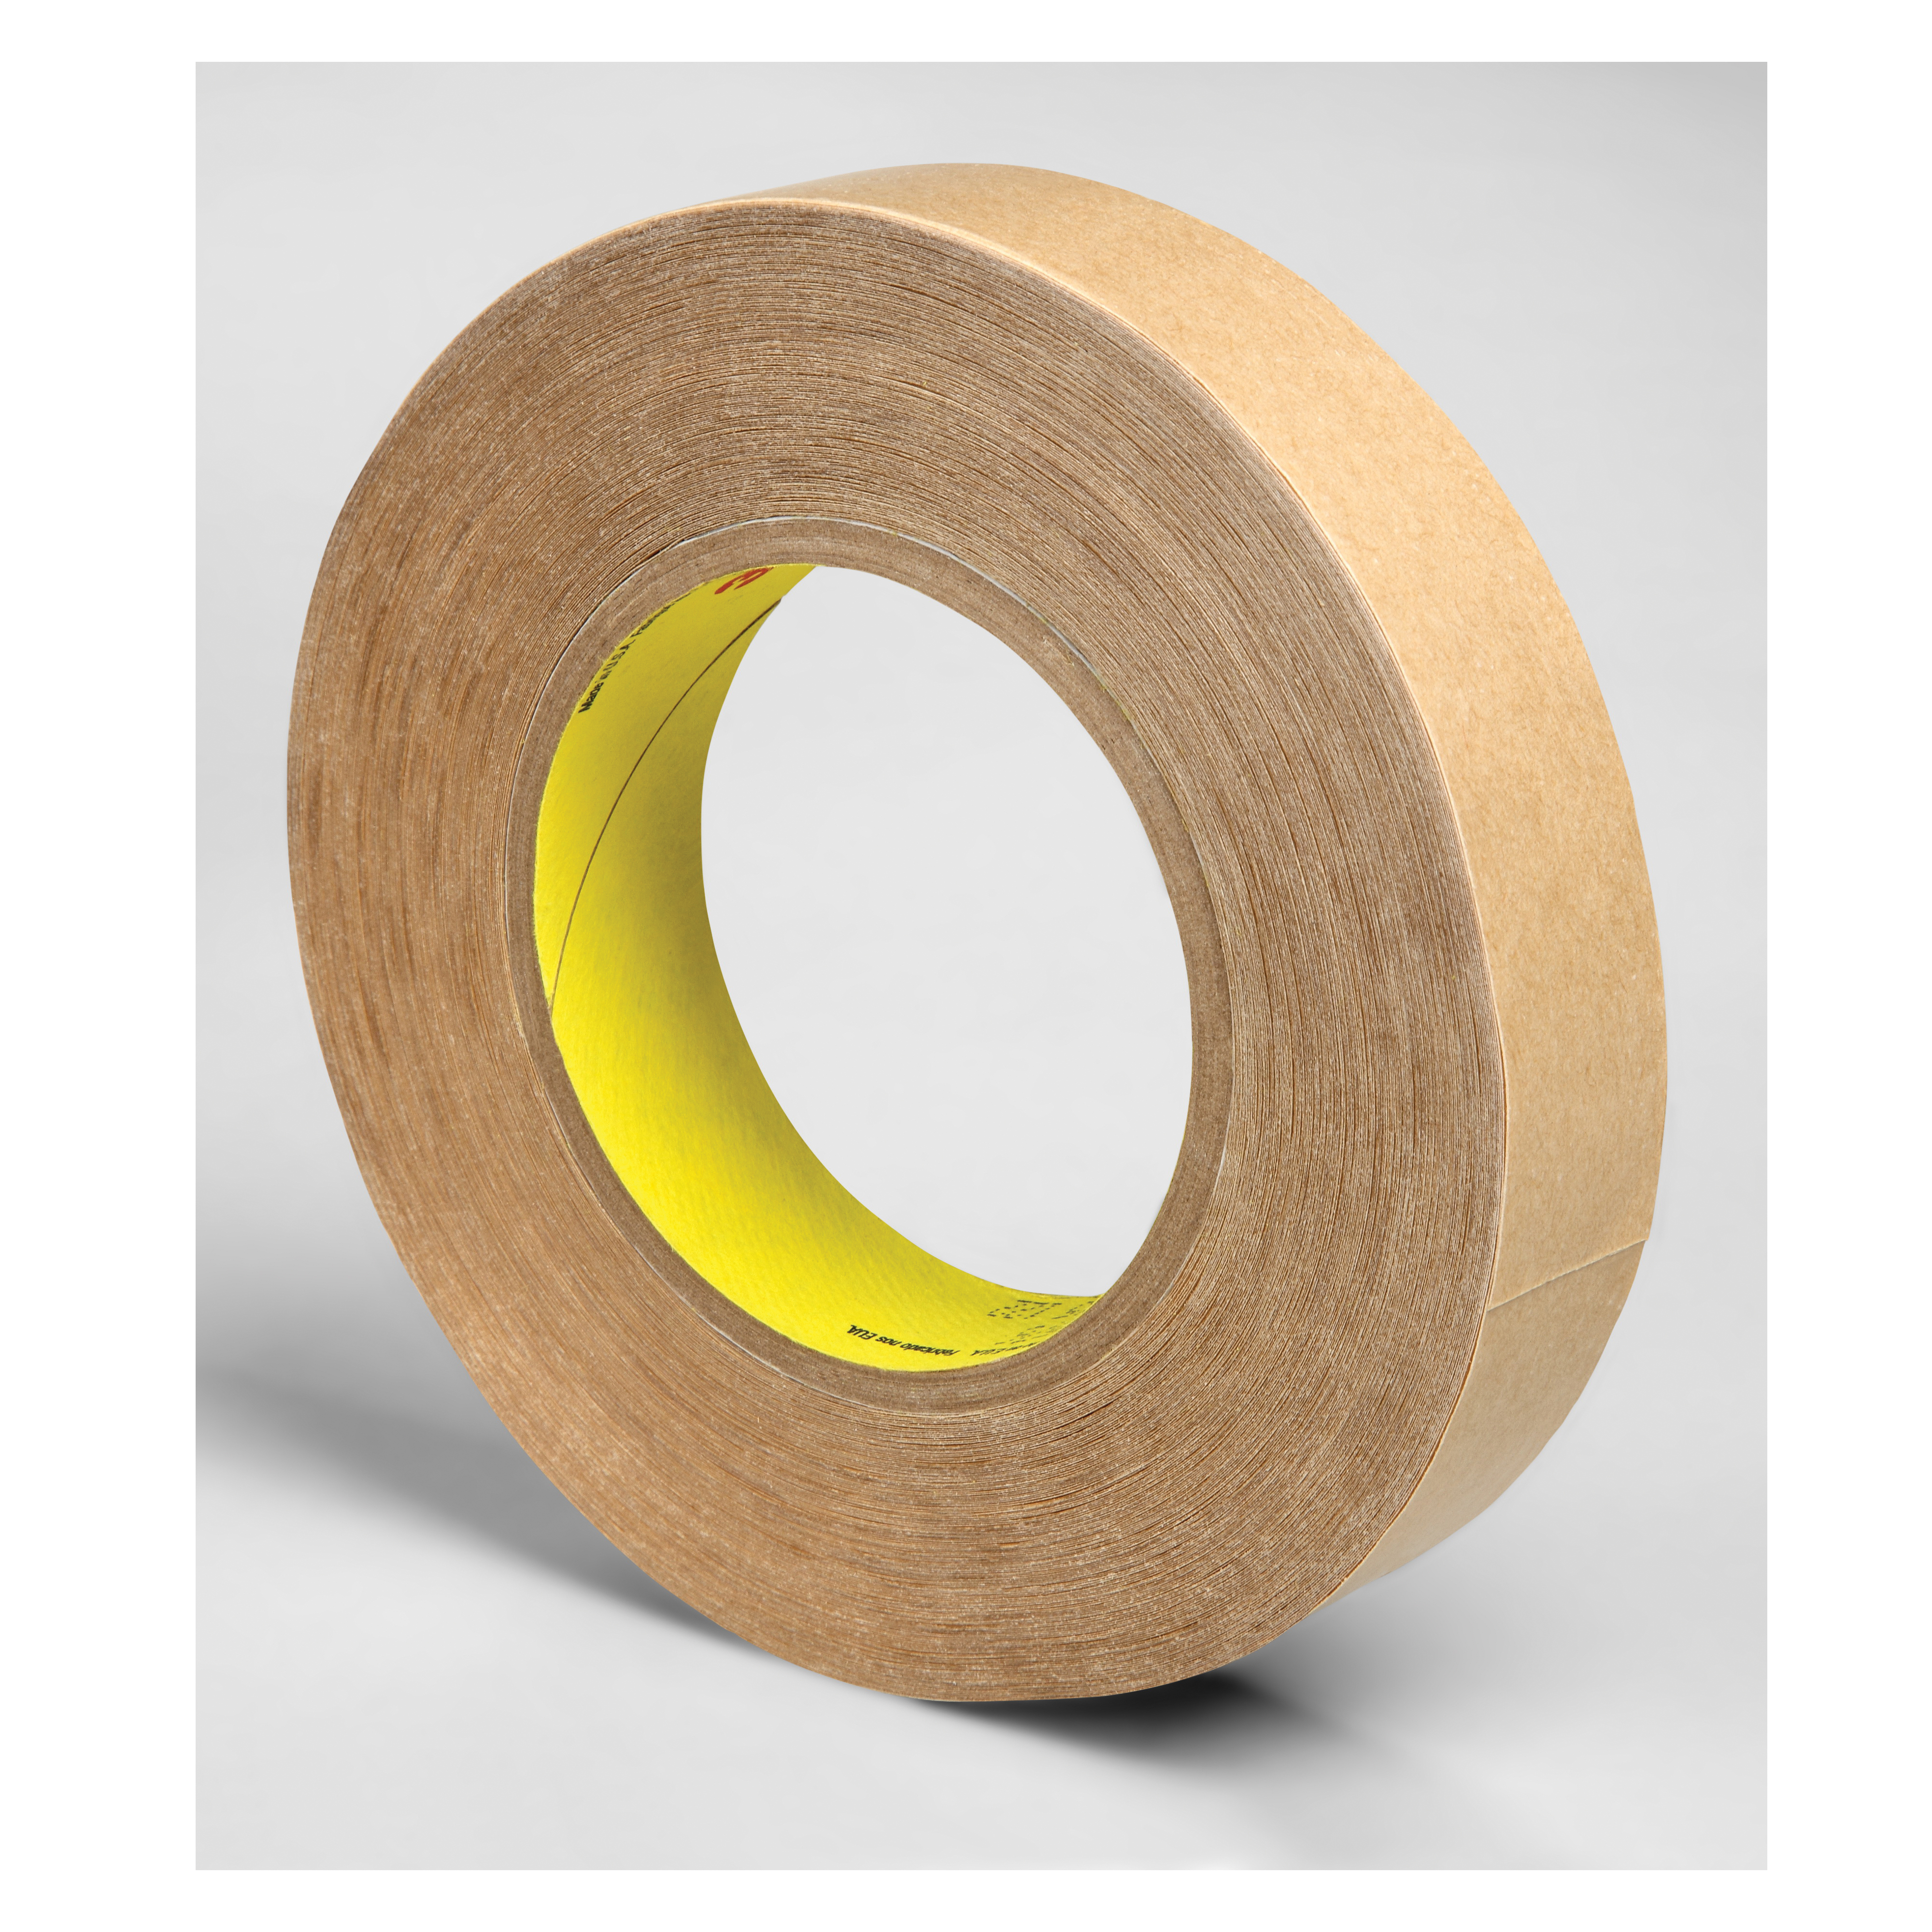 3M™ 021200-87288 Double Coated Tape, 60 yd L x 3/4 in W, 4 mil THK, 400HT Acrylic Adhesive, Polypropylene Backing, Clear